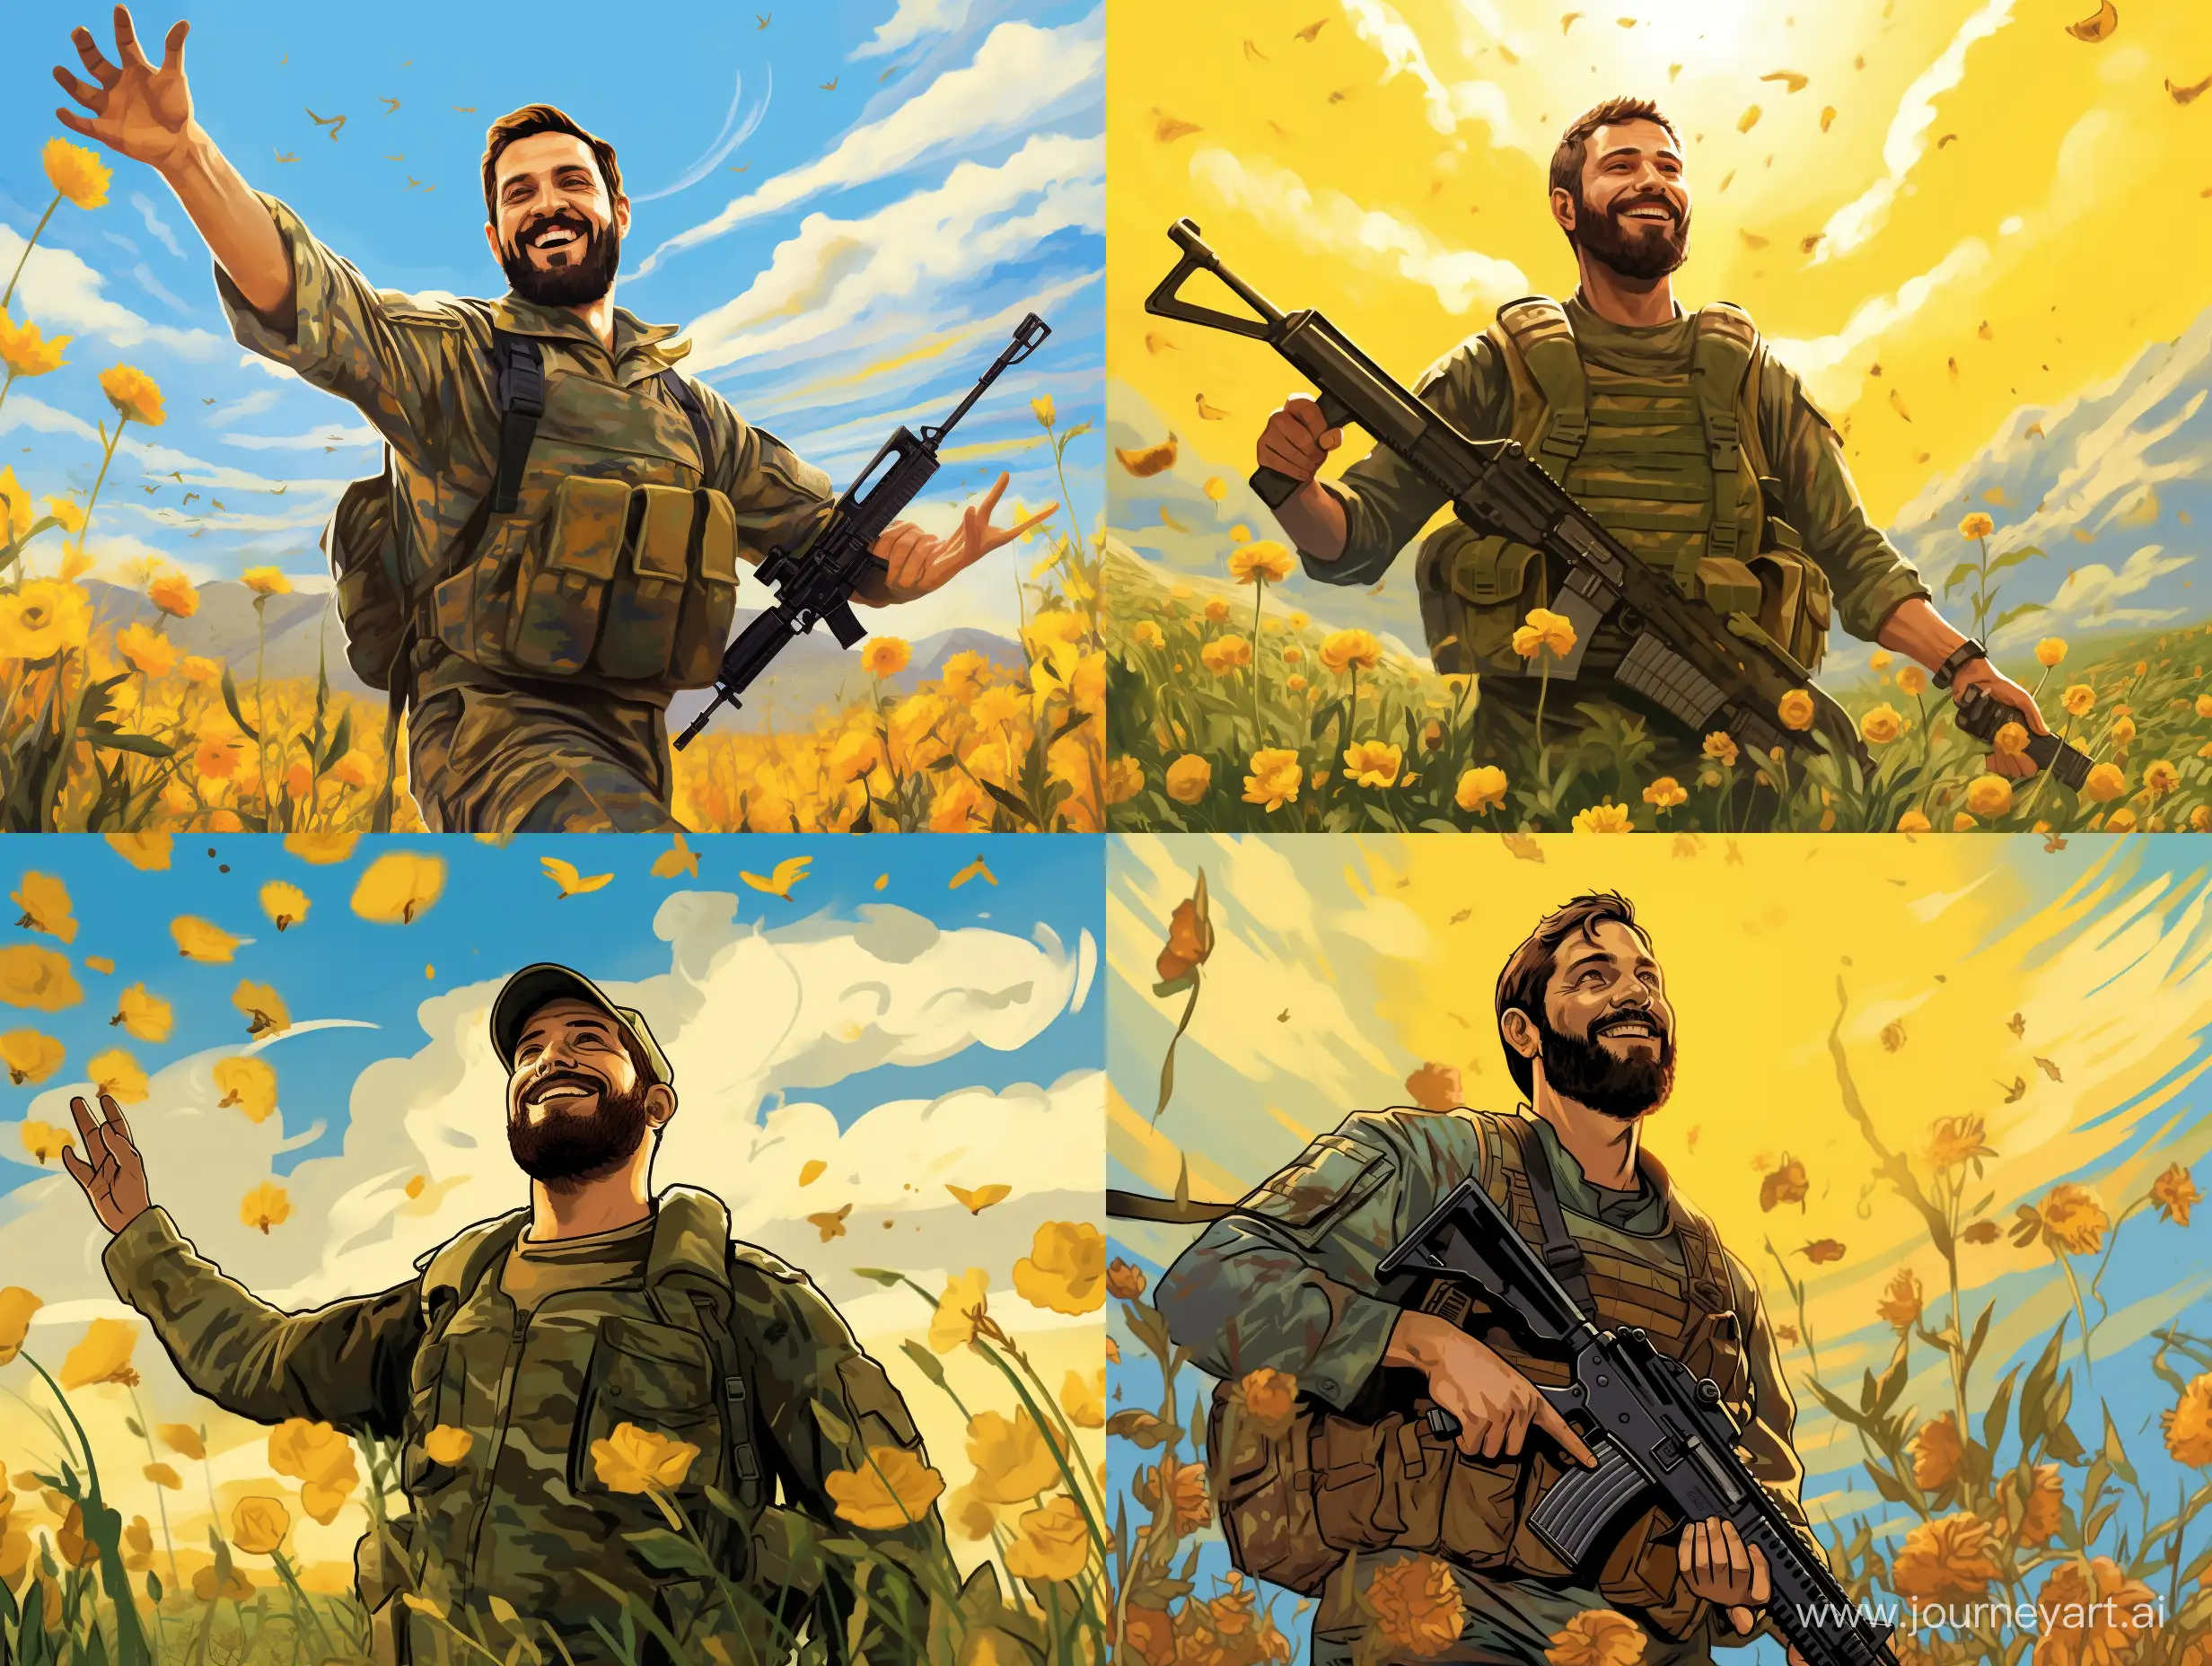 A Hezbollah soldier with a beard, smiling slightly, waving his hand, walking in a field surrounded by yellow roses and a blue sky above him.